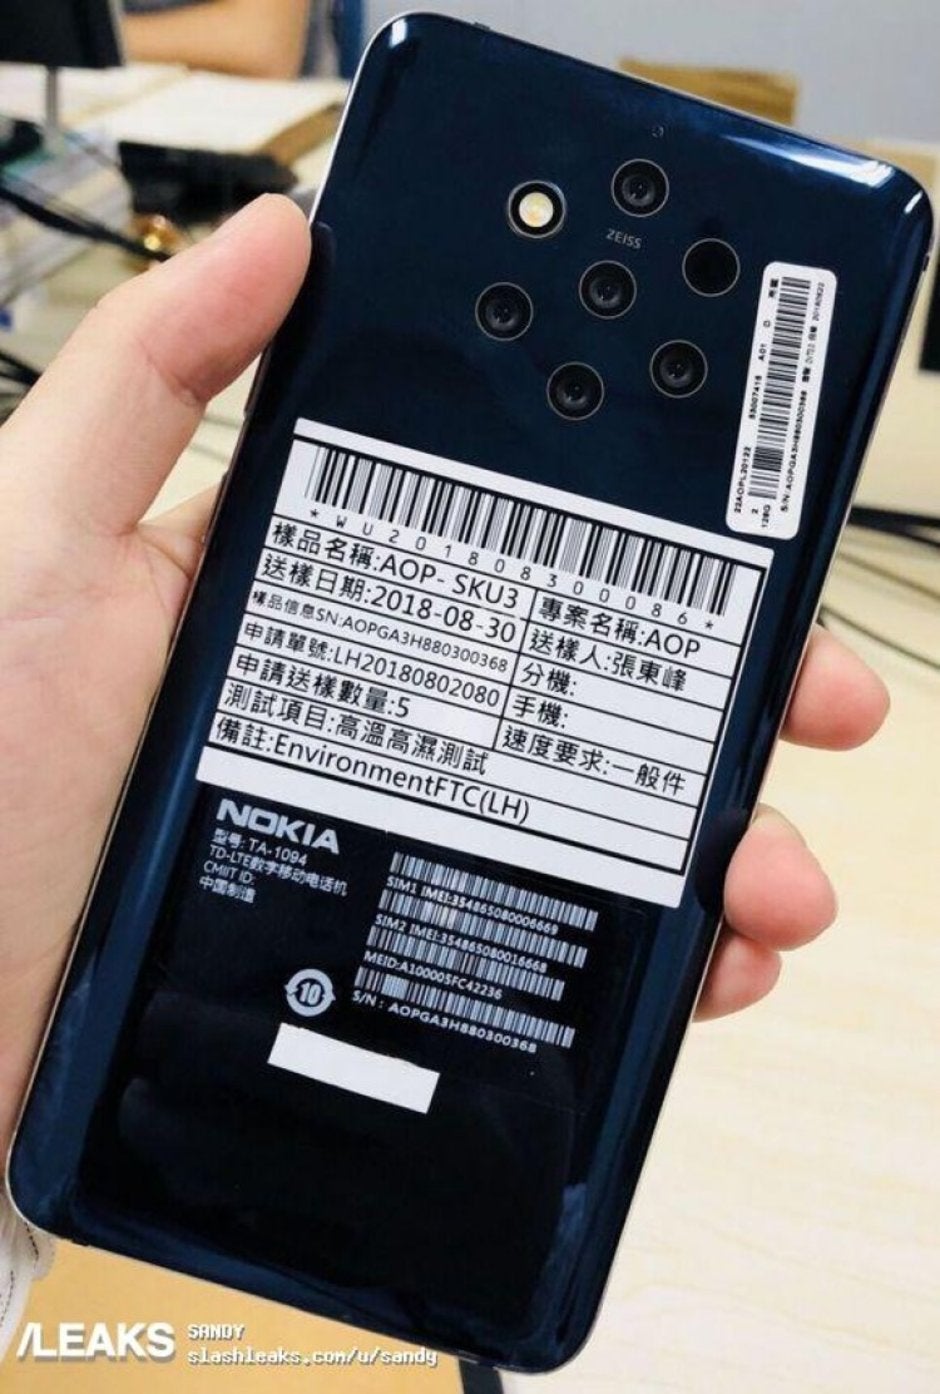 Alleged Nokia 9 leaks out with five rear cameras in possible hands-on image